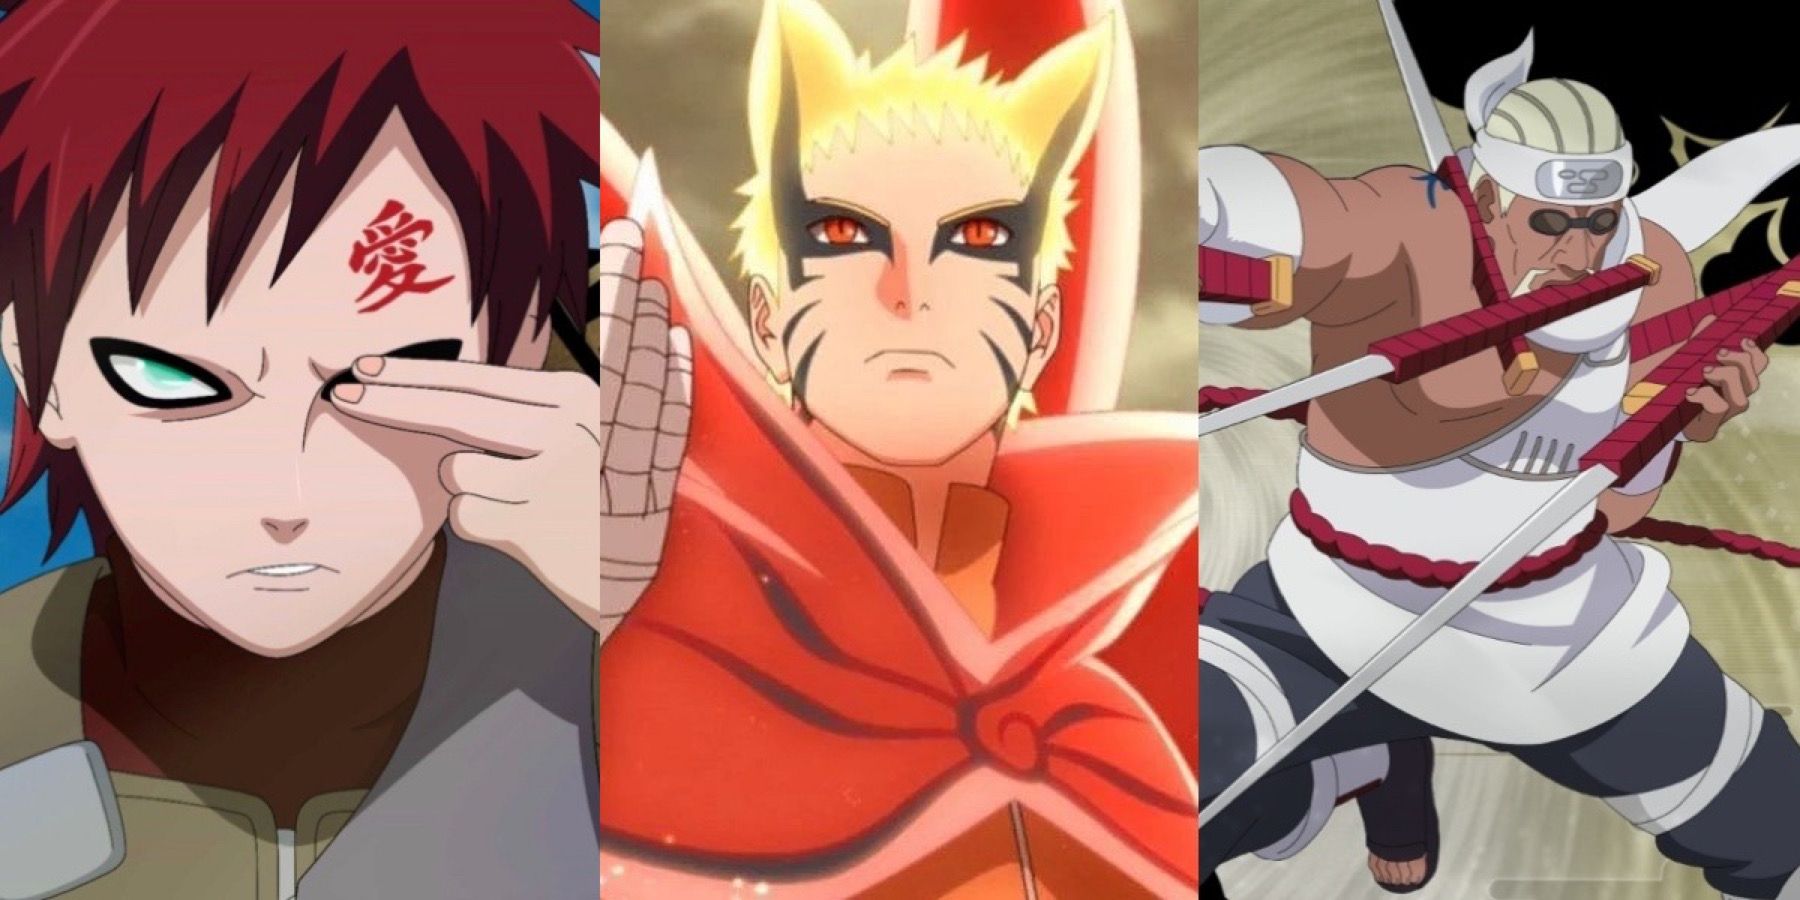 Can Saskue get his chakra back now that it was stolen in Boruto (anime)?  How? - Mt. Myoboku - Quora